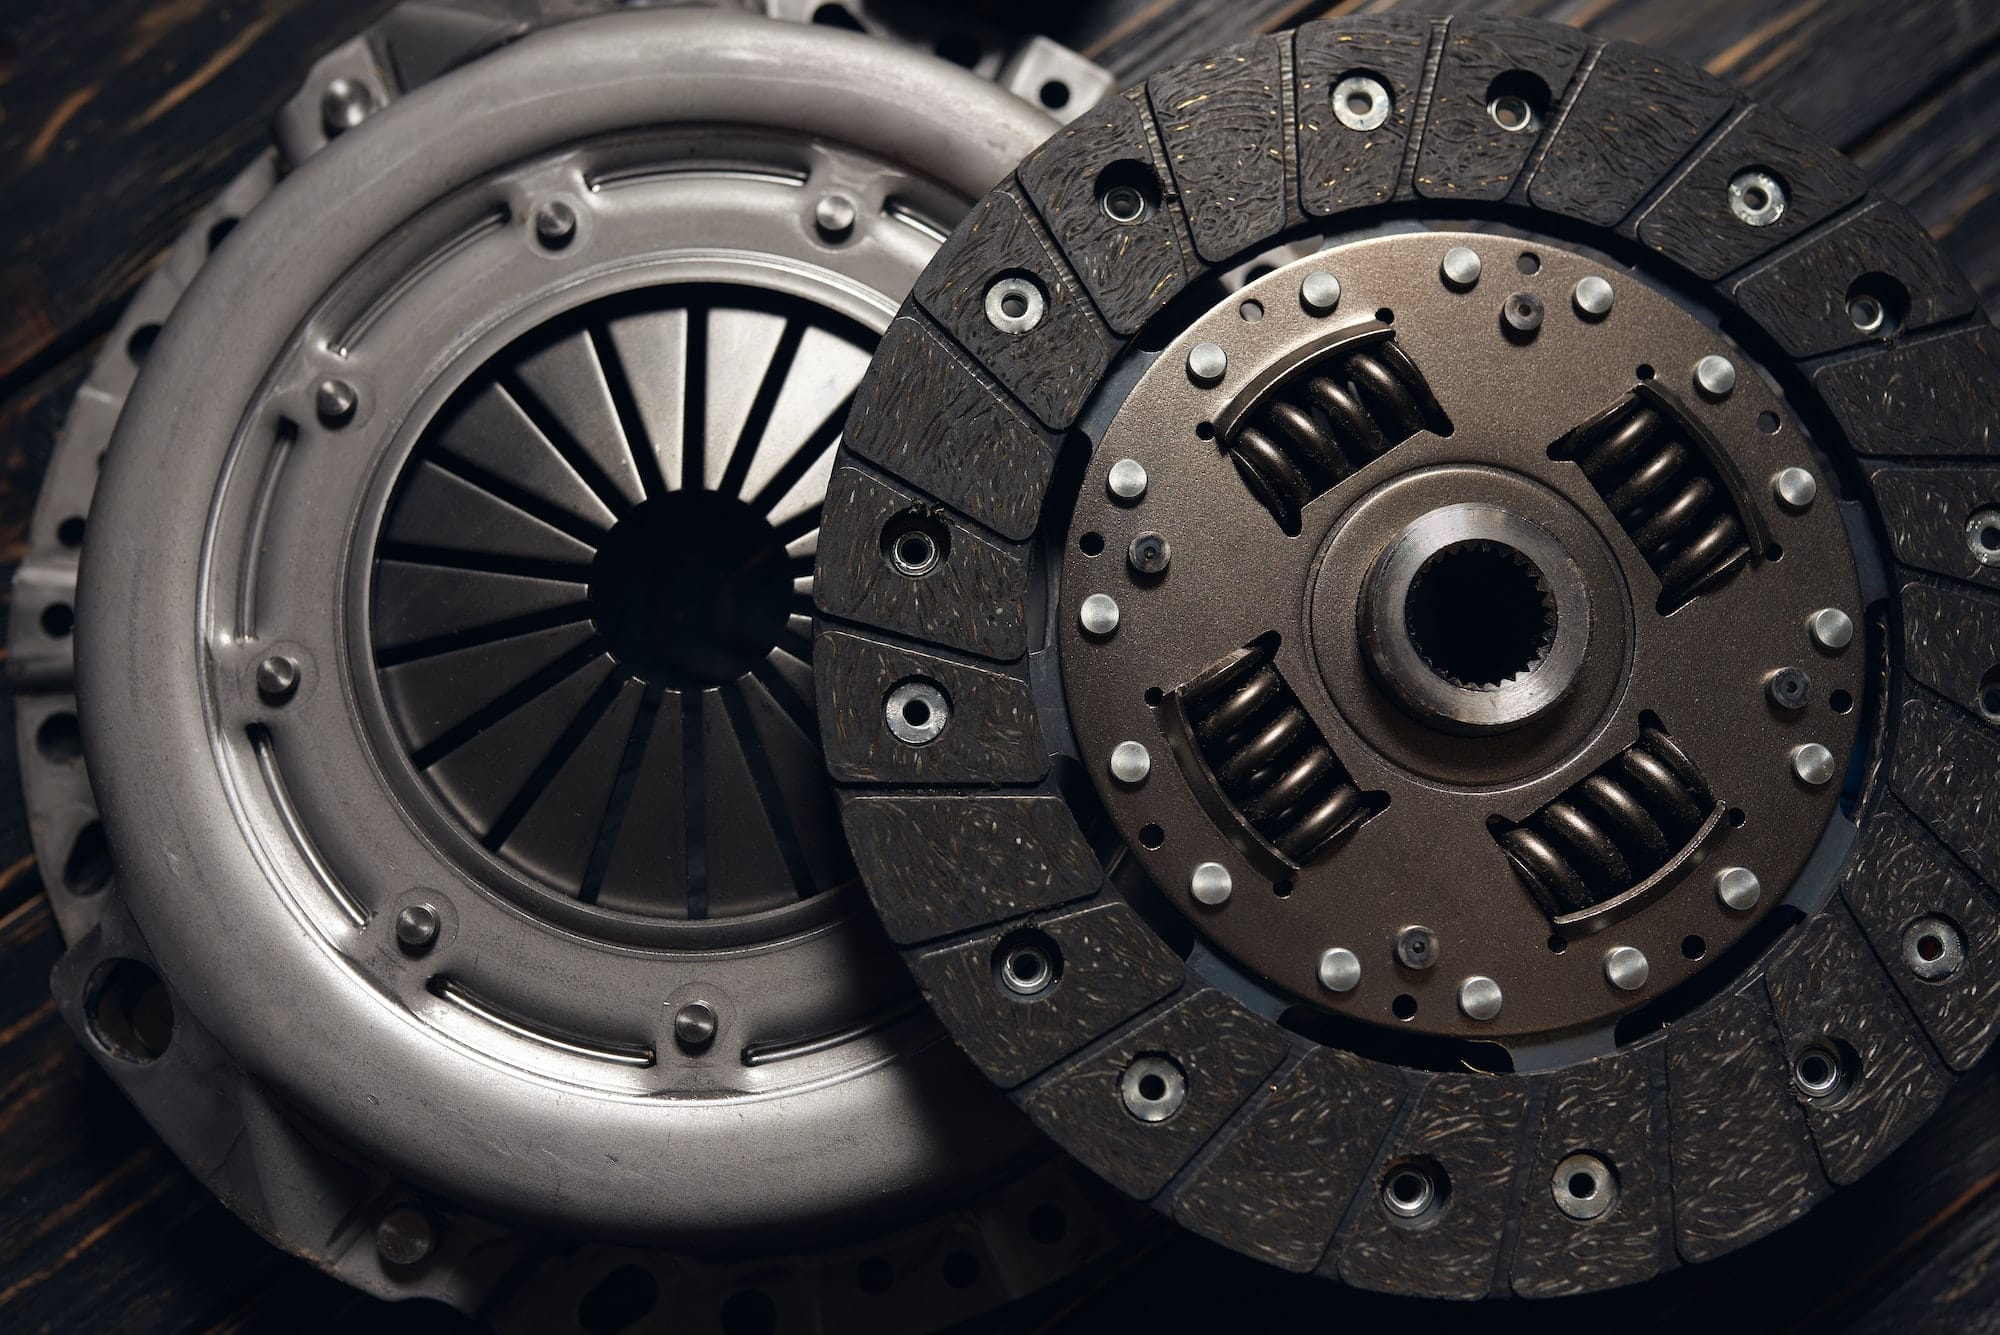 new car clutch kit on a dark wooden background. Close up